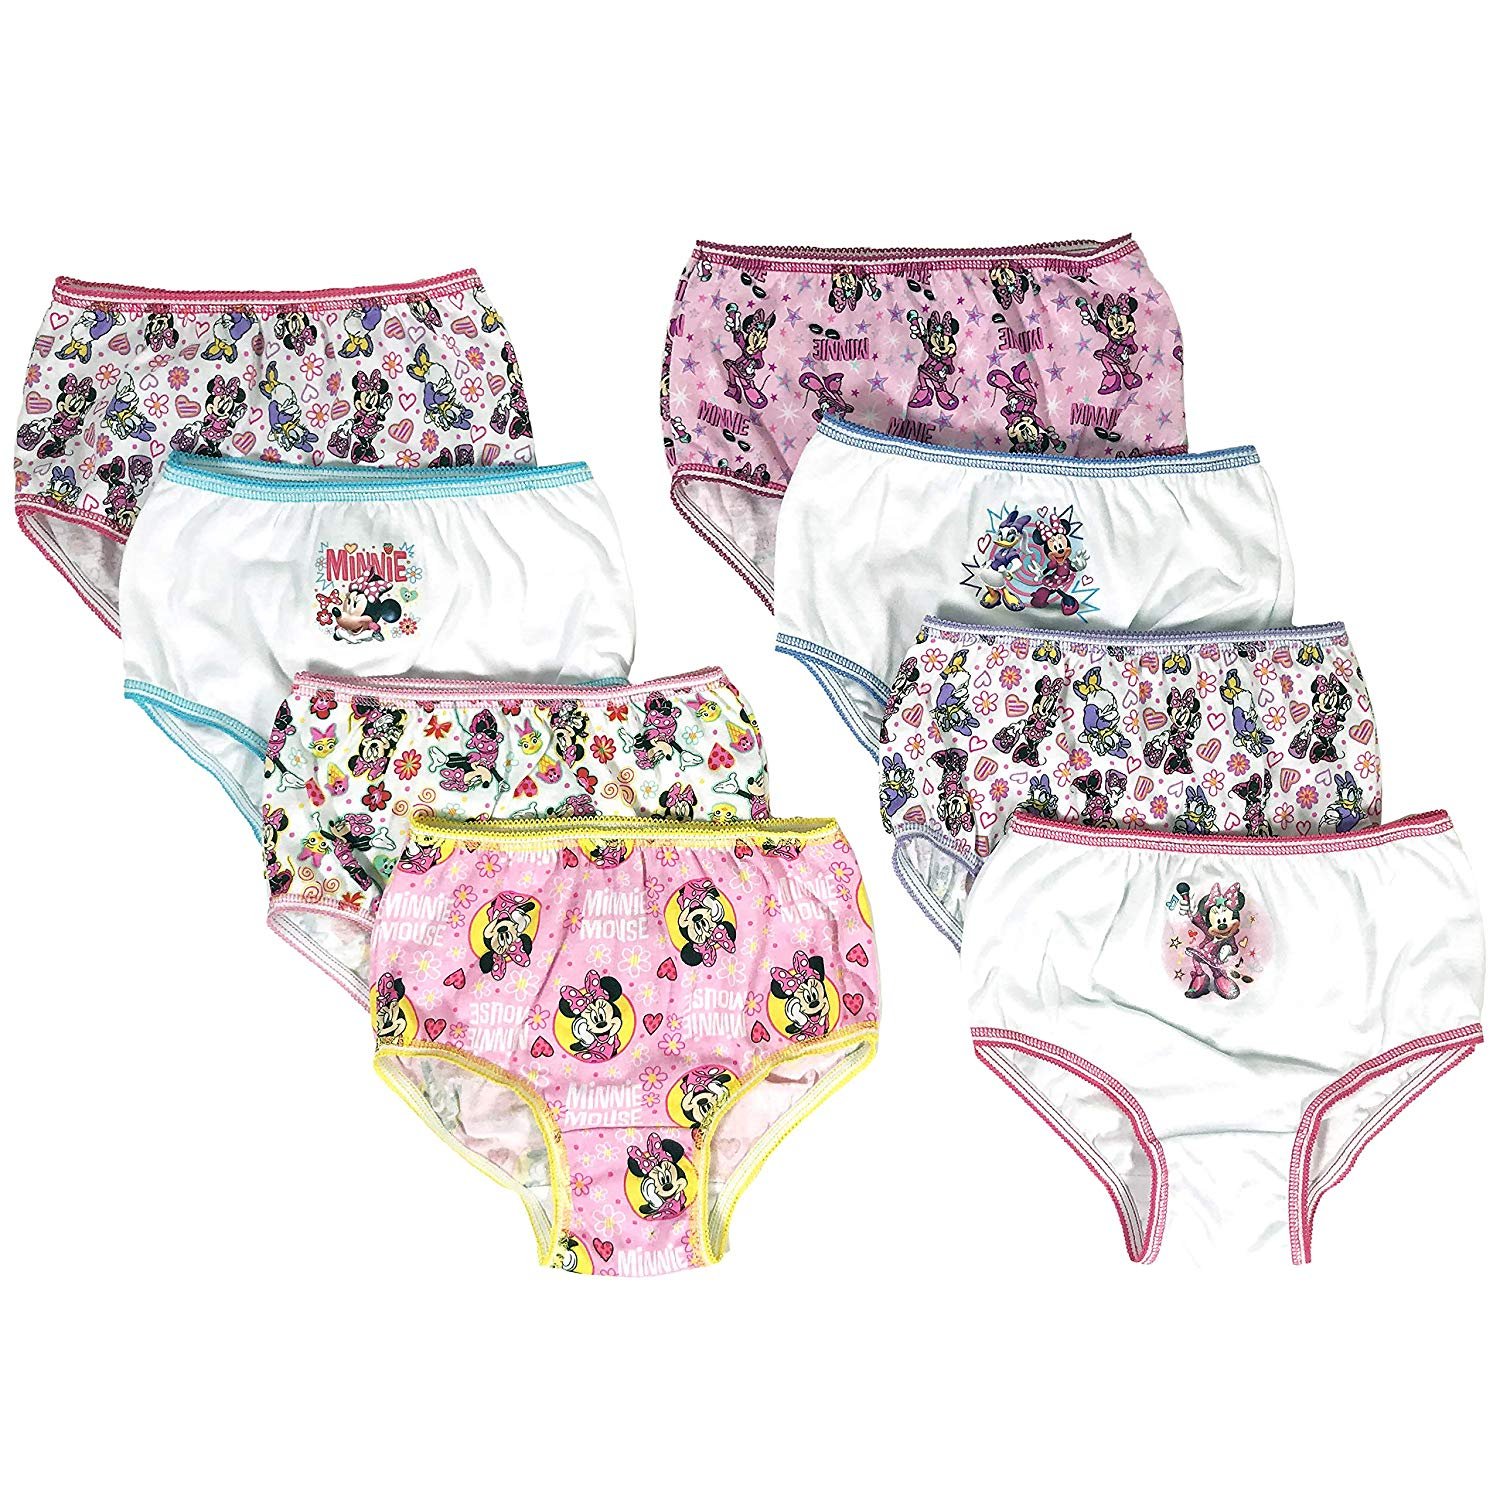 Minnie Mouse Girls Panties 8-Pack Sizes 2T/3T, 4T, 4, 6, 8